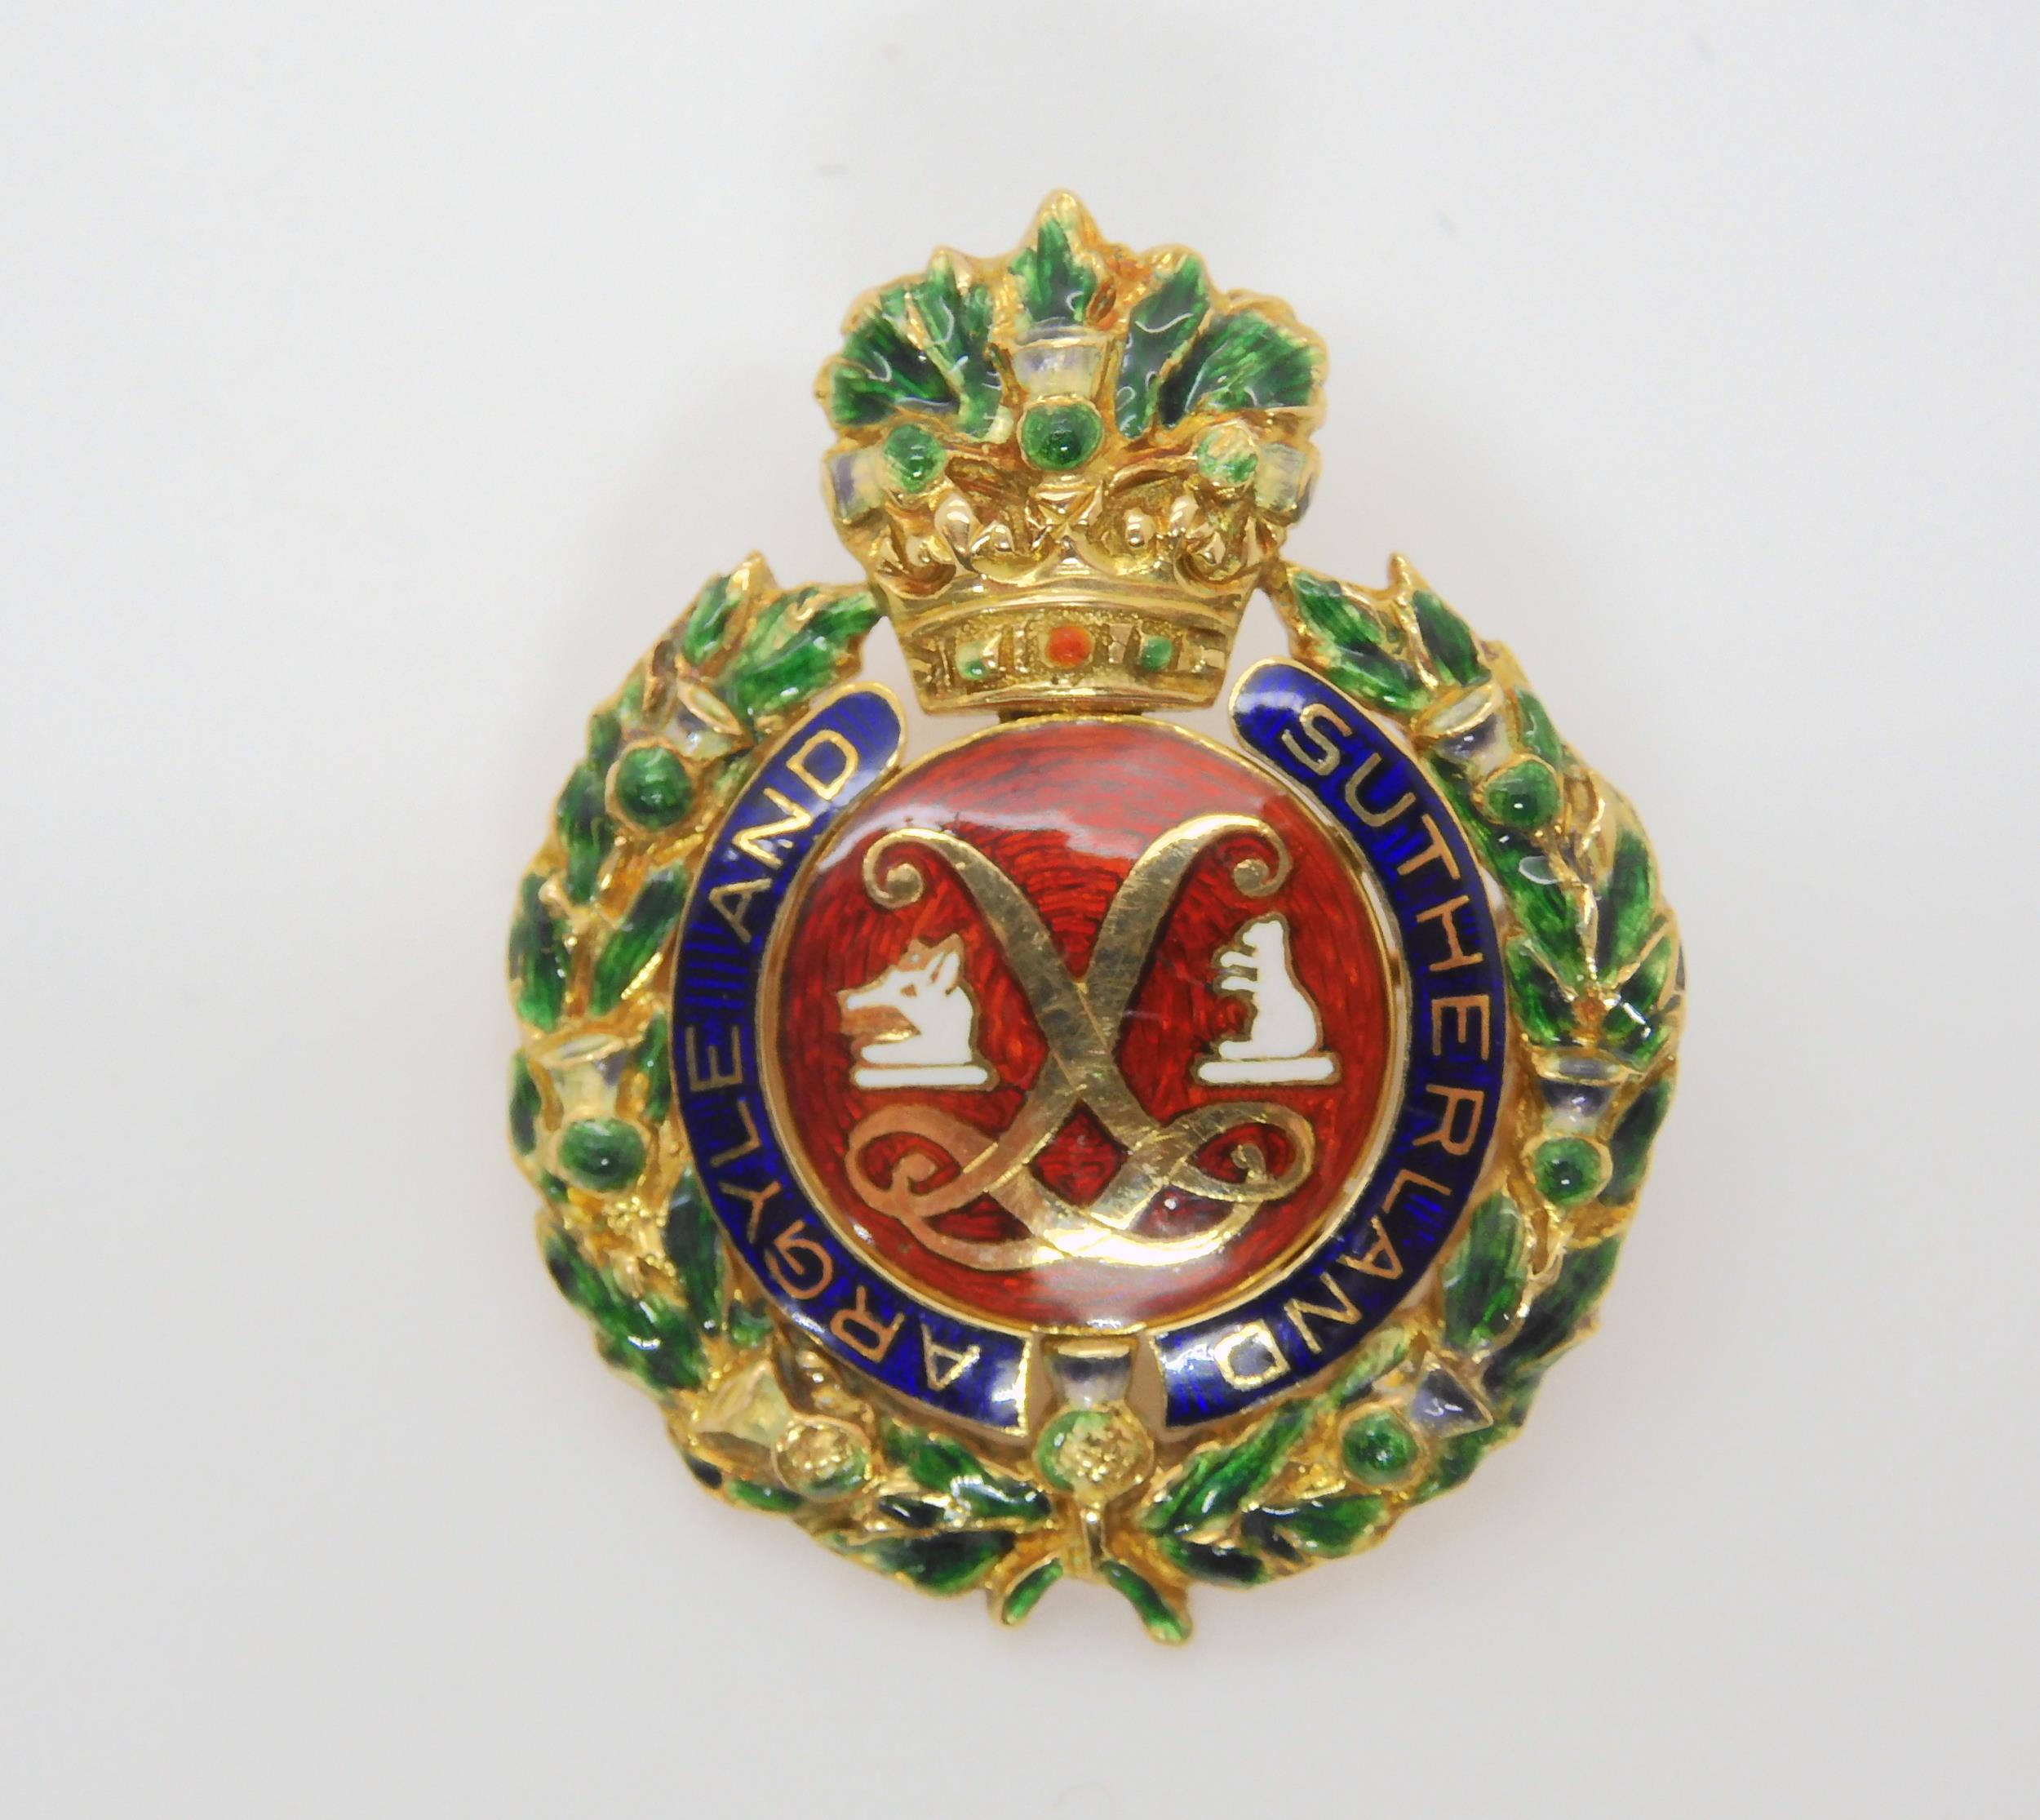 A SWEETHEART BROOCH in yellow metal and enamel for the 'Argyle and Sutherland Highlanders'. With